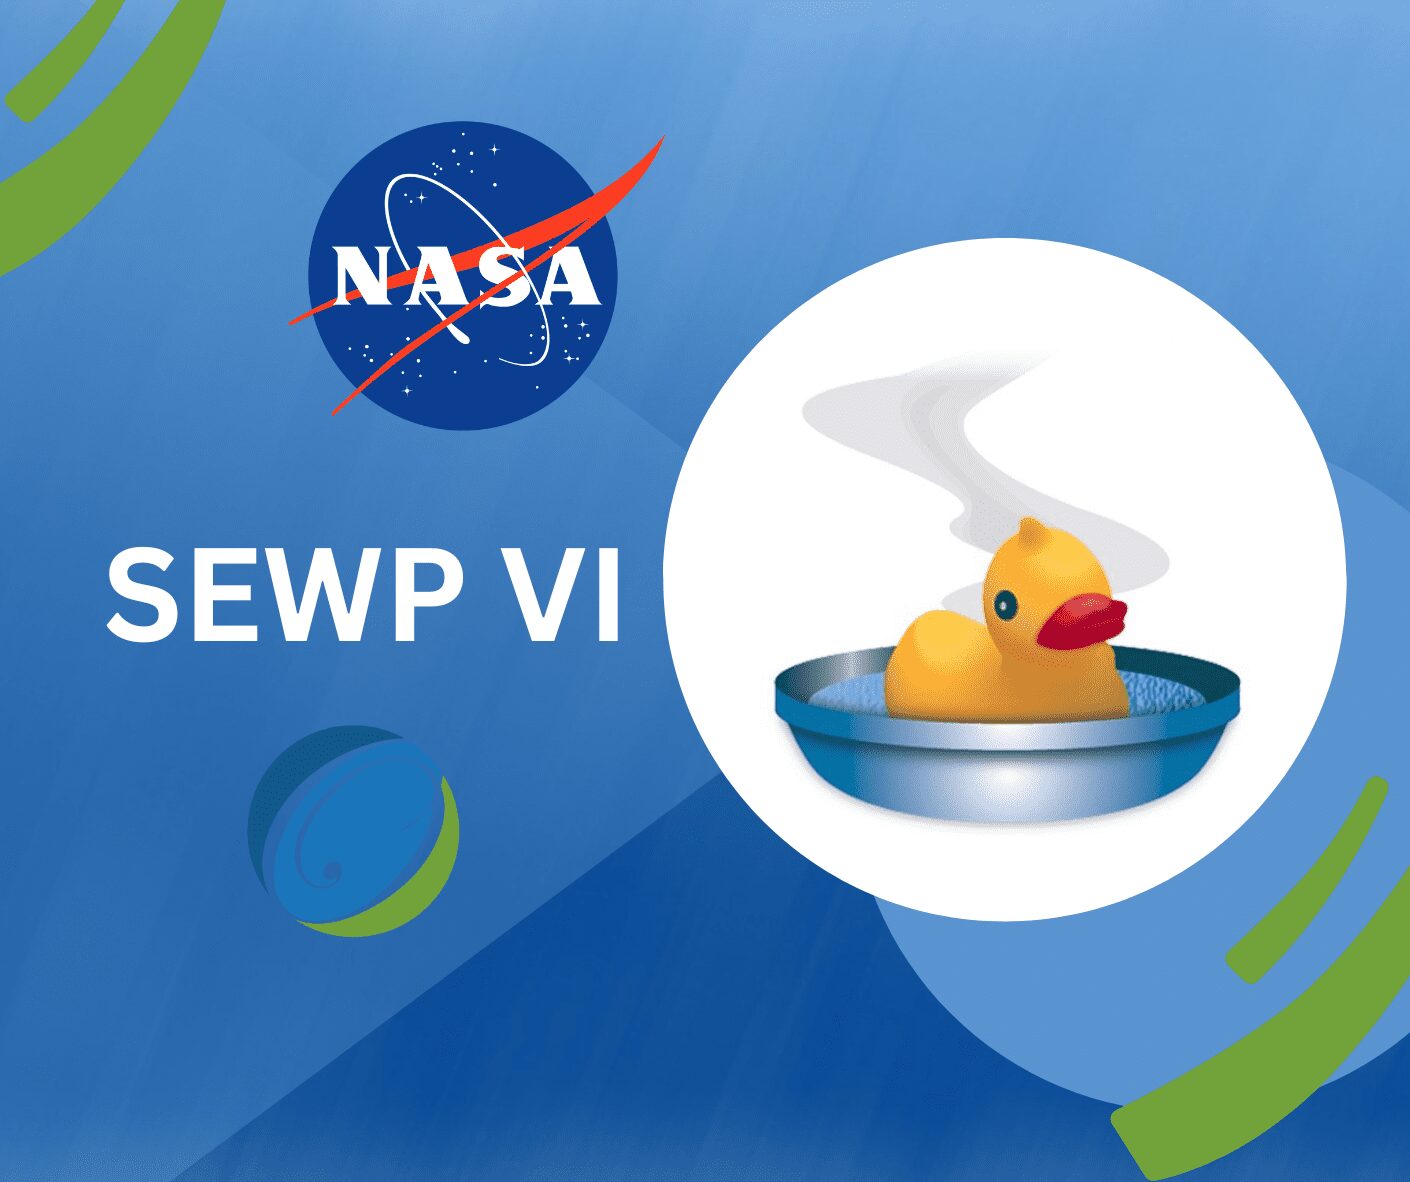 NASA to Meet with Contractors in Virginia Nov 15, 2022 to Discuss SEWP VI